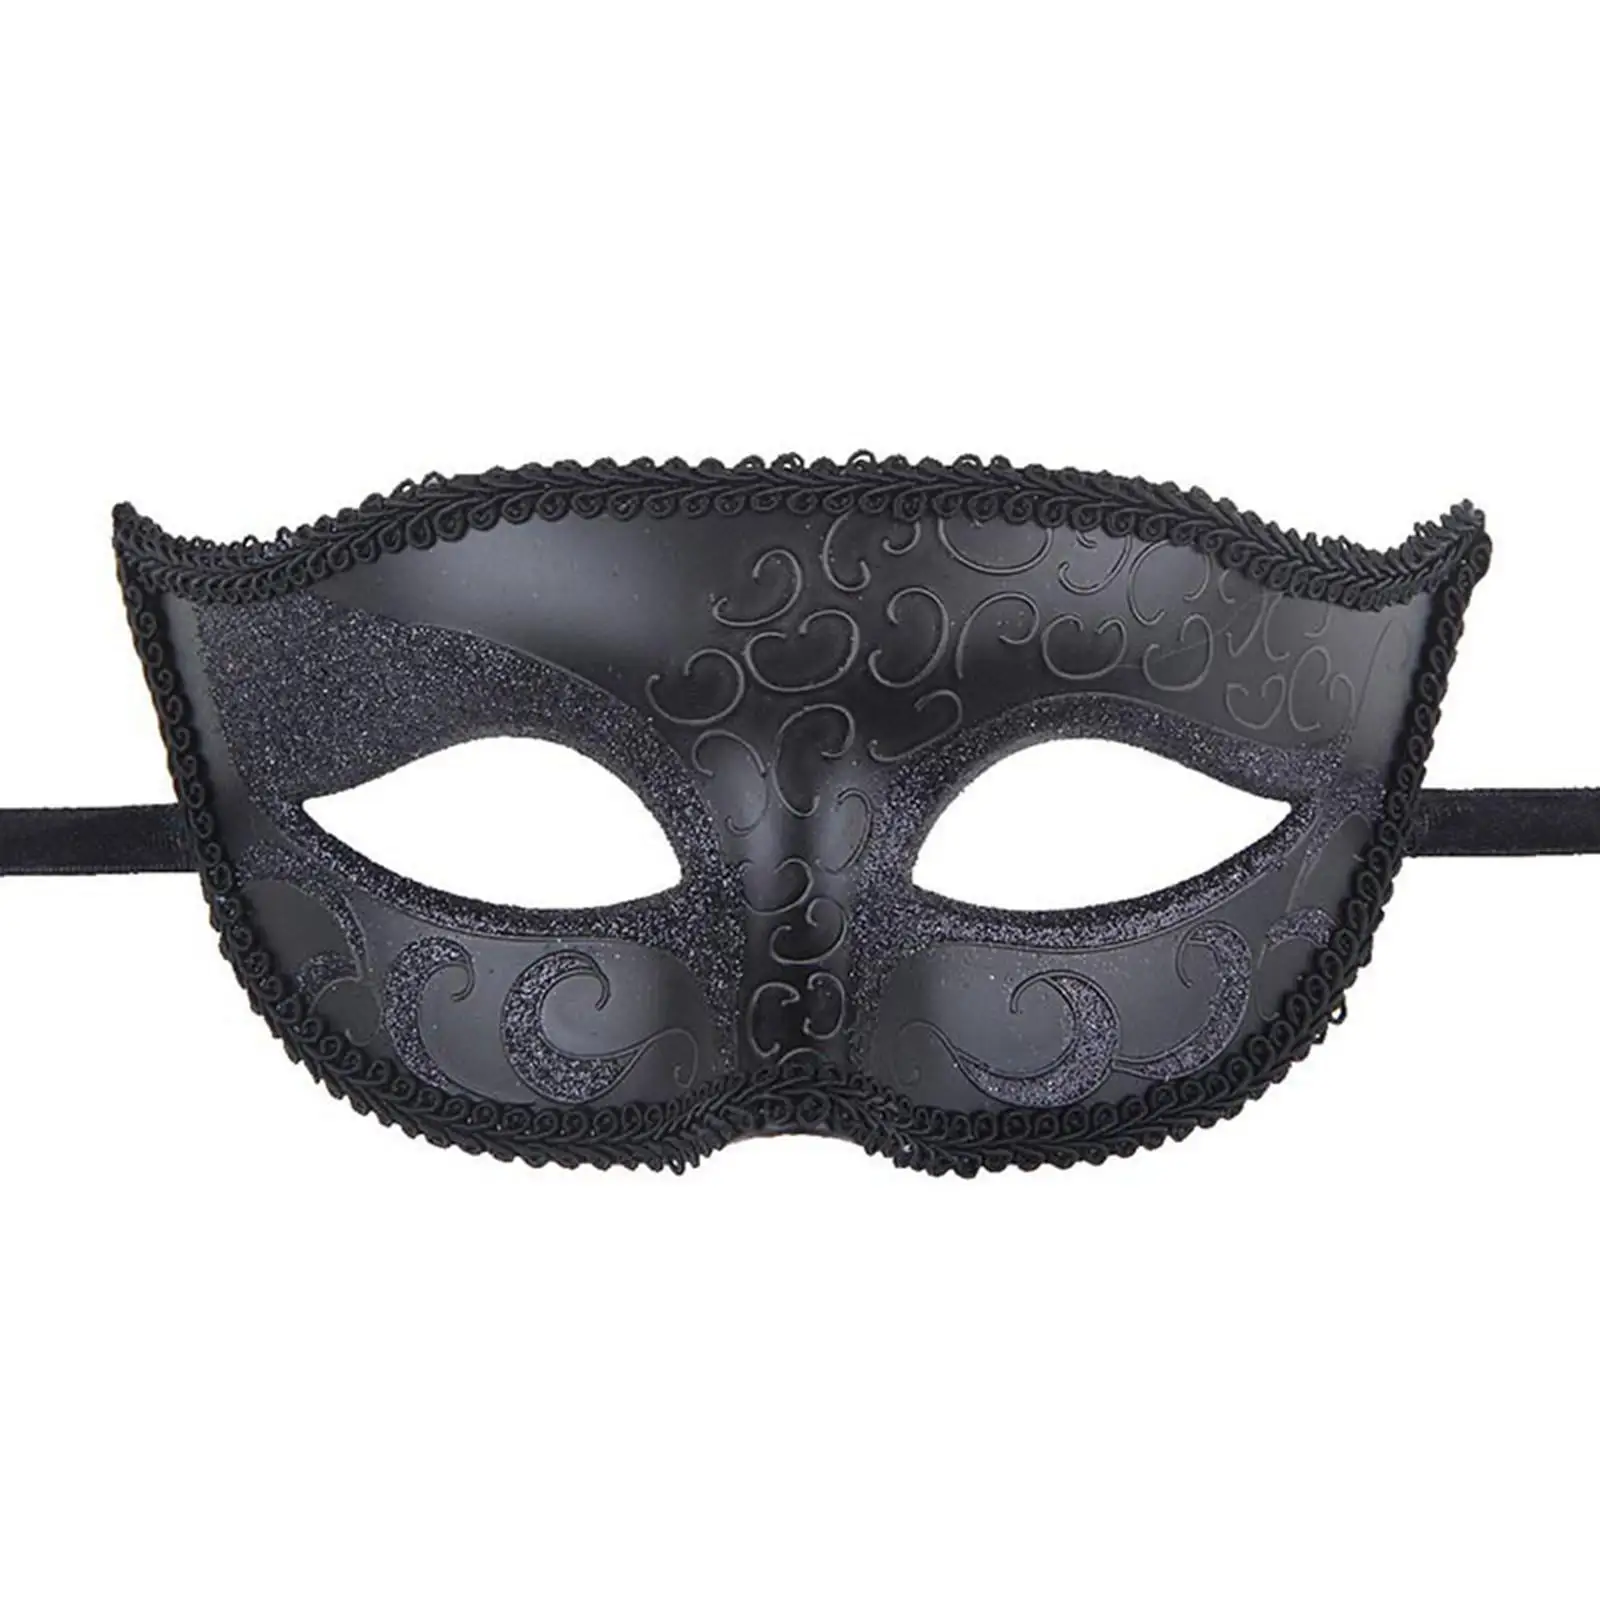  Half   Cosplay Costume Masquerade Ball  for Party